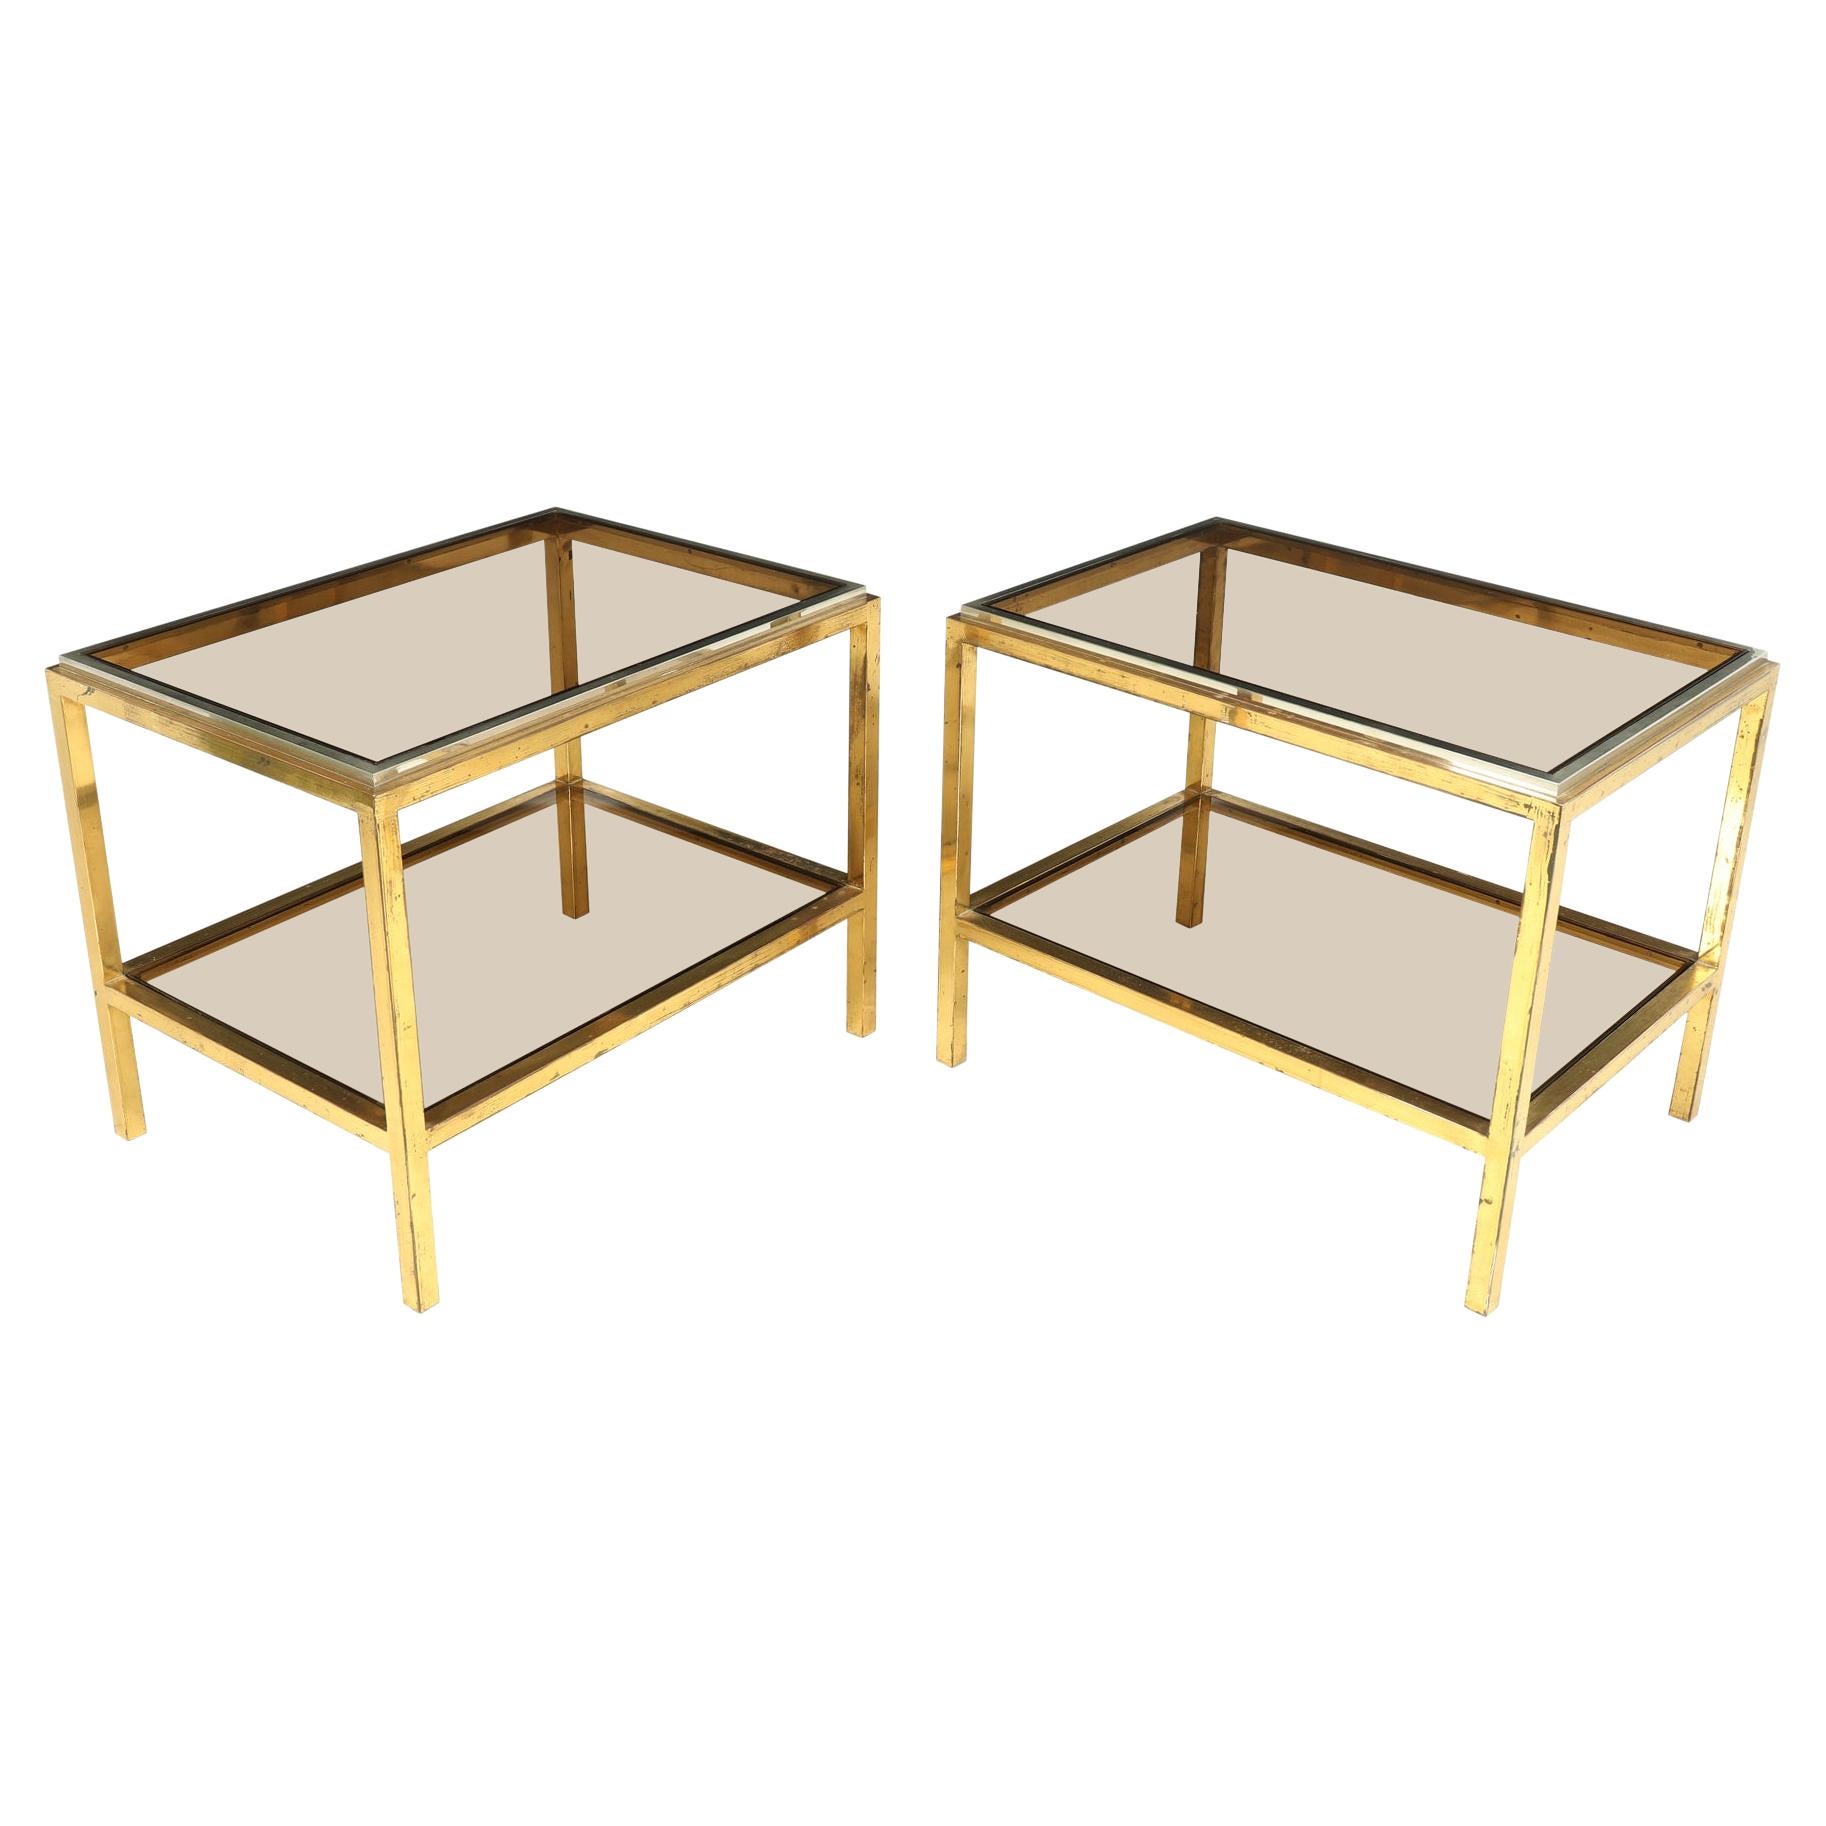 Pair of Glass and Steel Side Tables in the Manner of Willy Rizzo, c1960